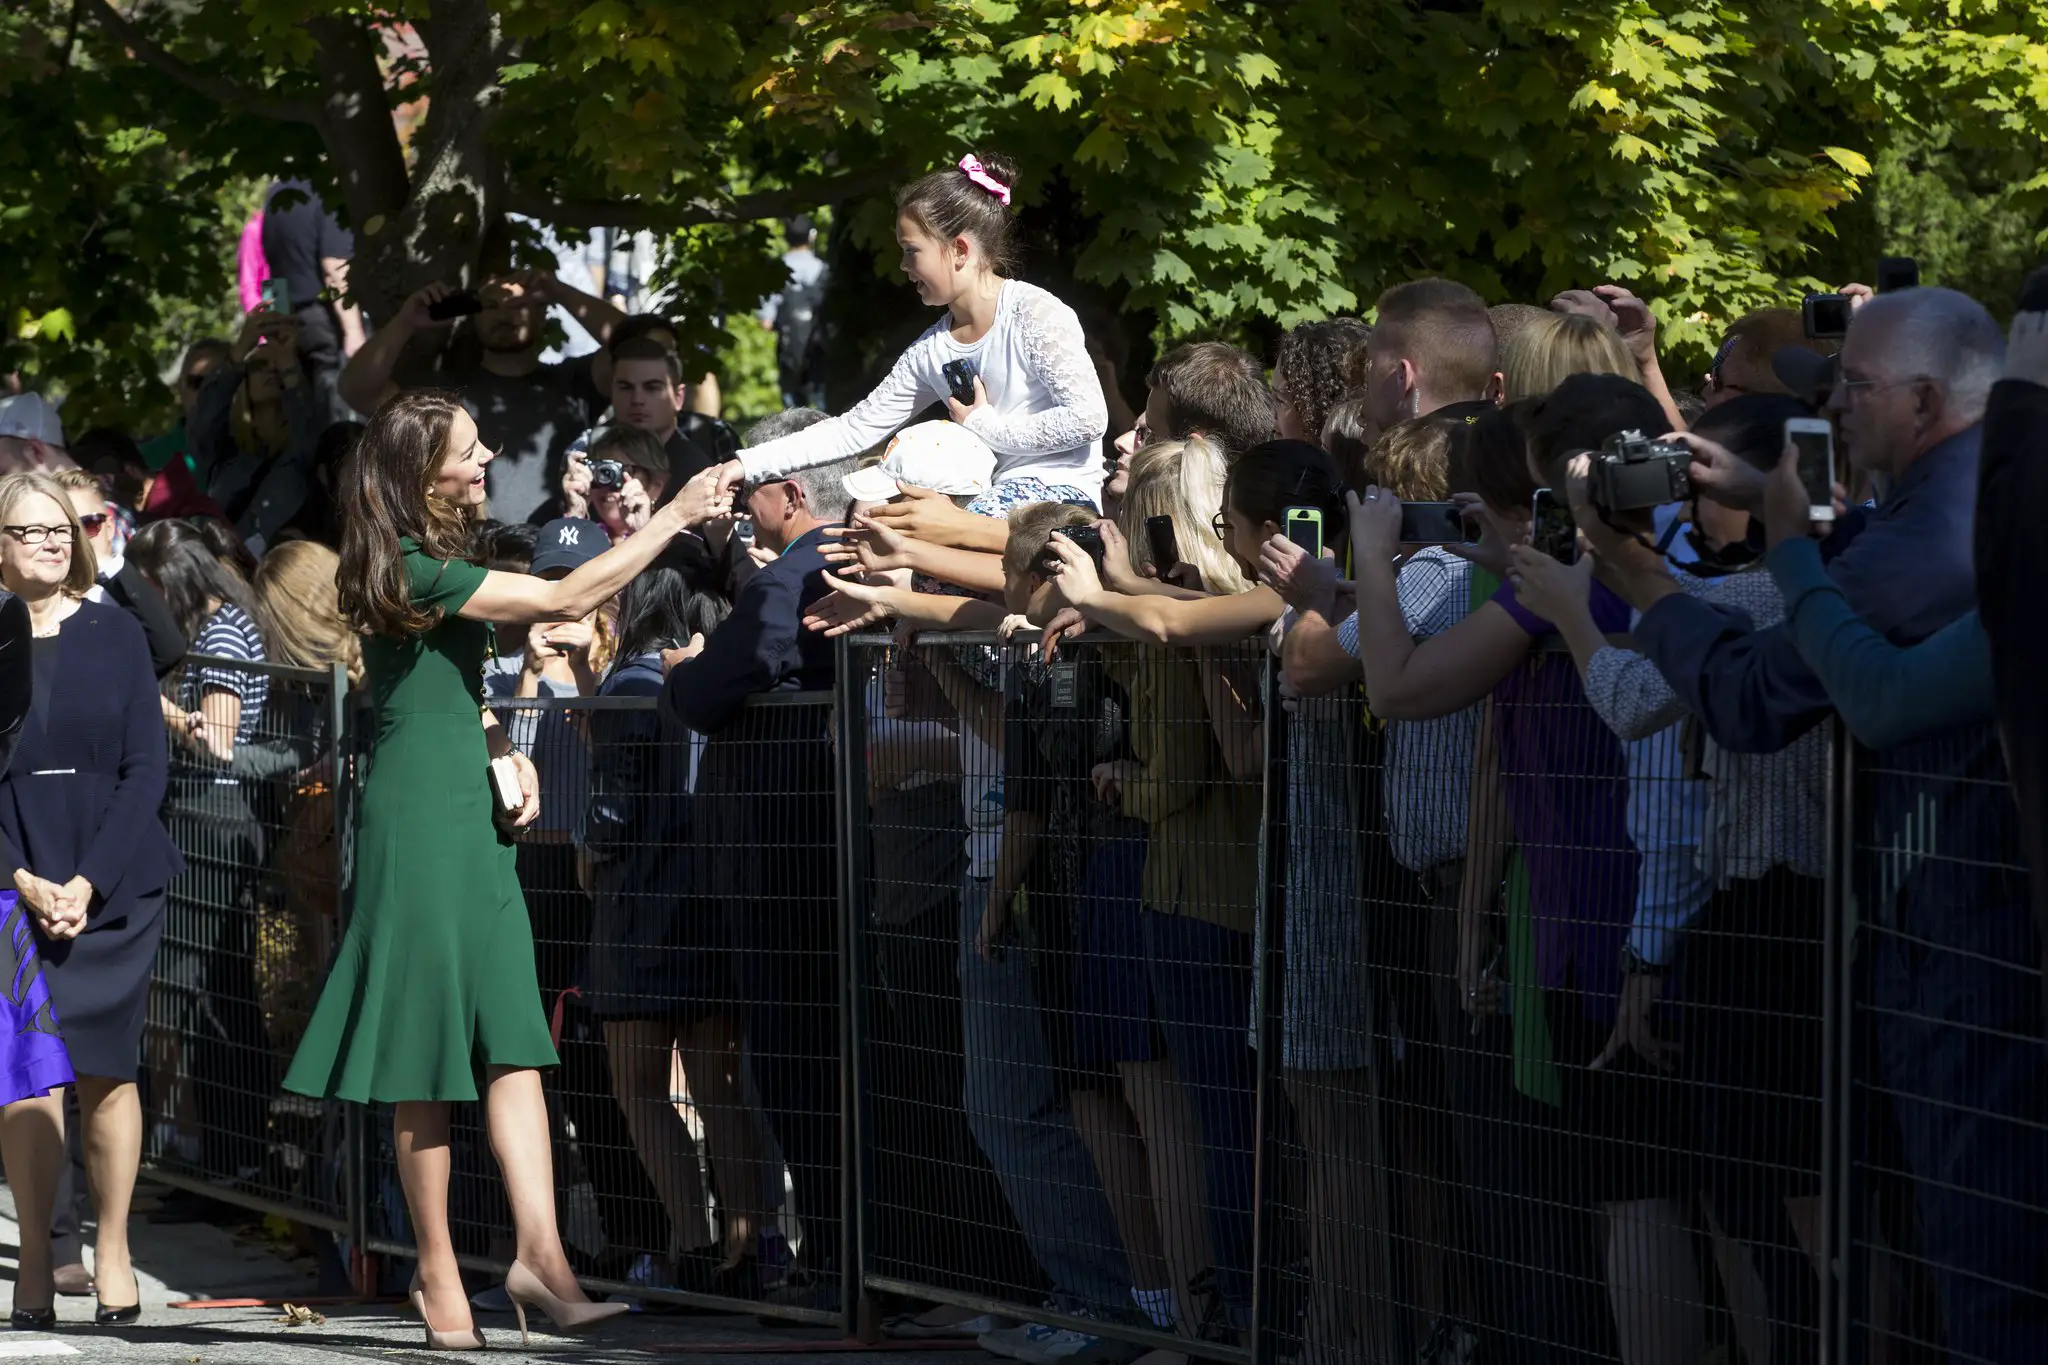 The Duchess of Cambridge meeting with the public in kelowna